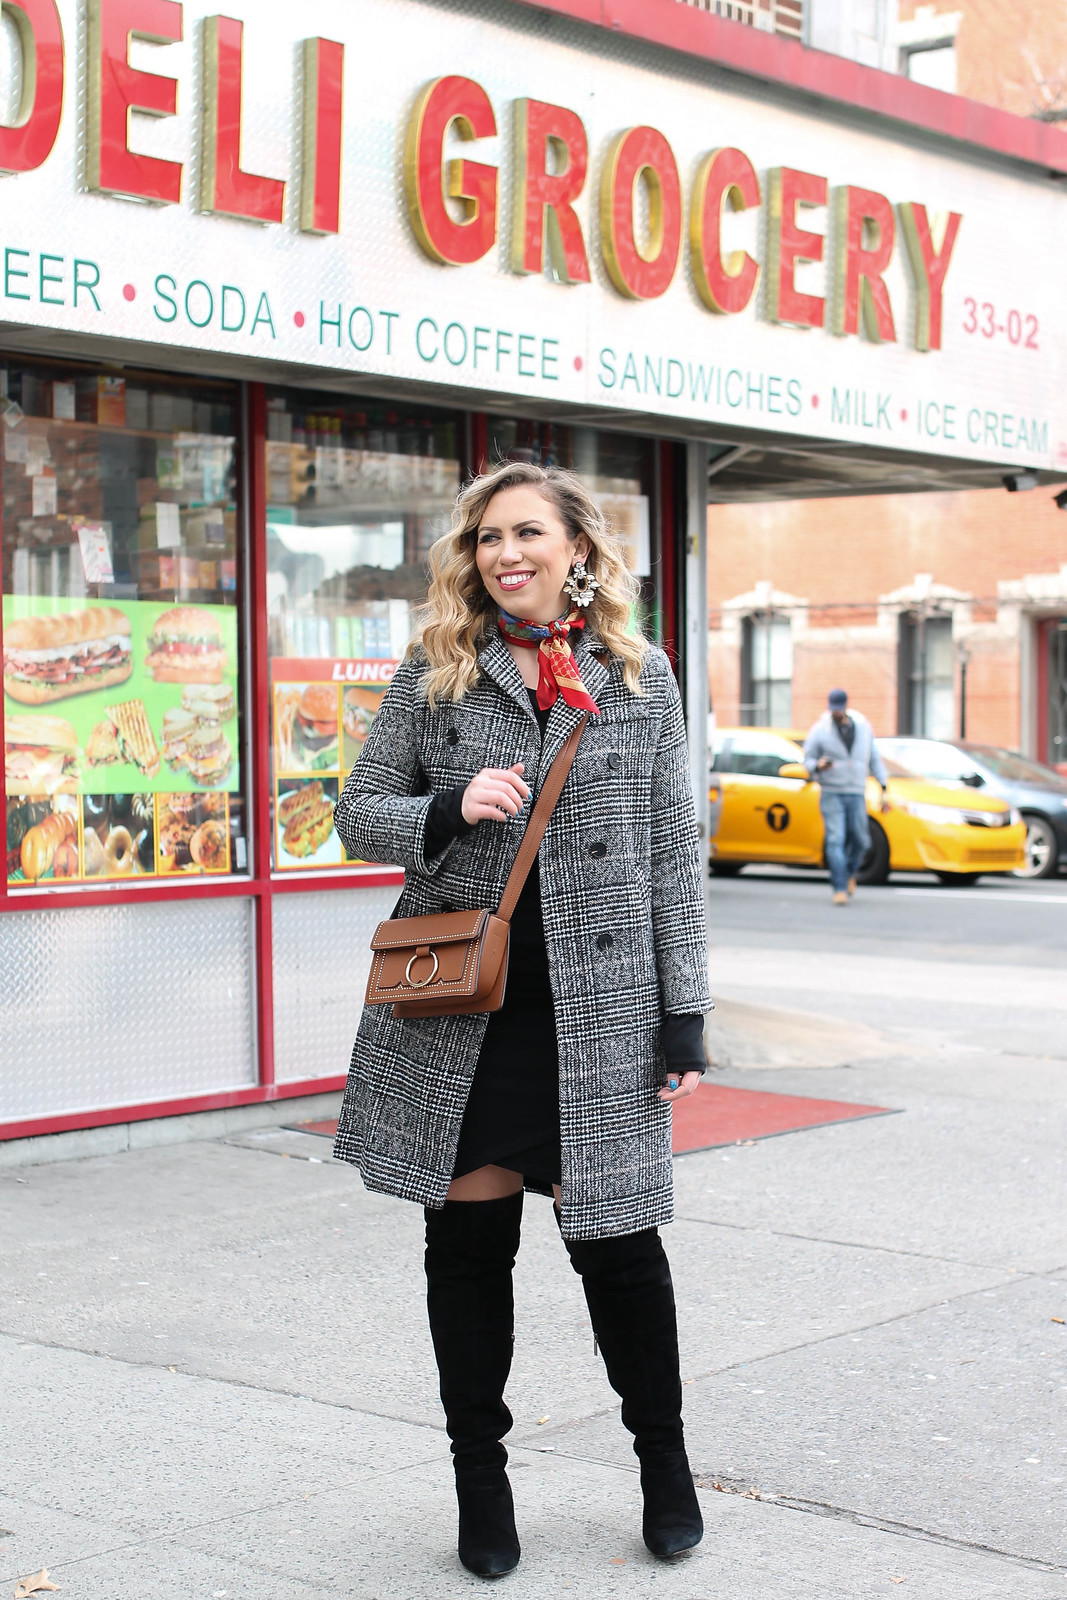 New York Winter All Black Outfit Plaid Coat Melie Bianco Cheri Bag Vintage Red Neck Scarf Curly Blonde Hair